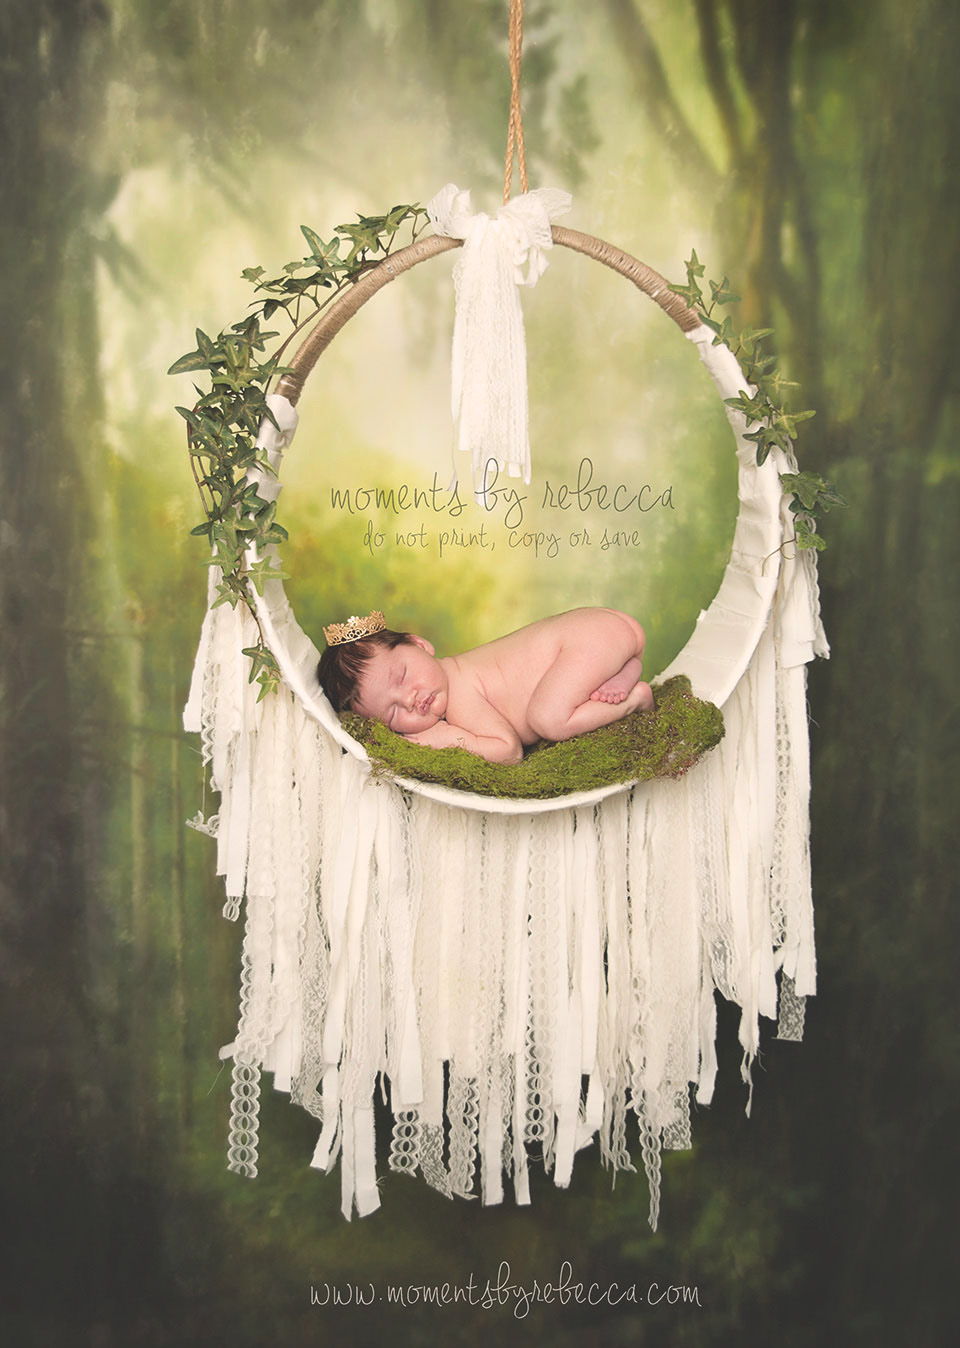 newborn photography community critique photo submitted by Rebecca Kopas - 4 community members set this photo as a favourite image.